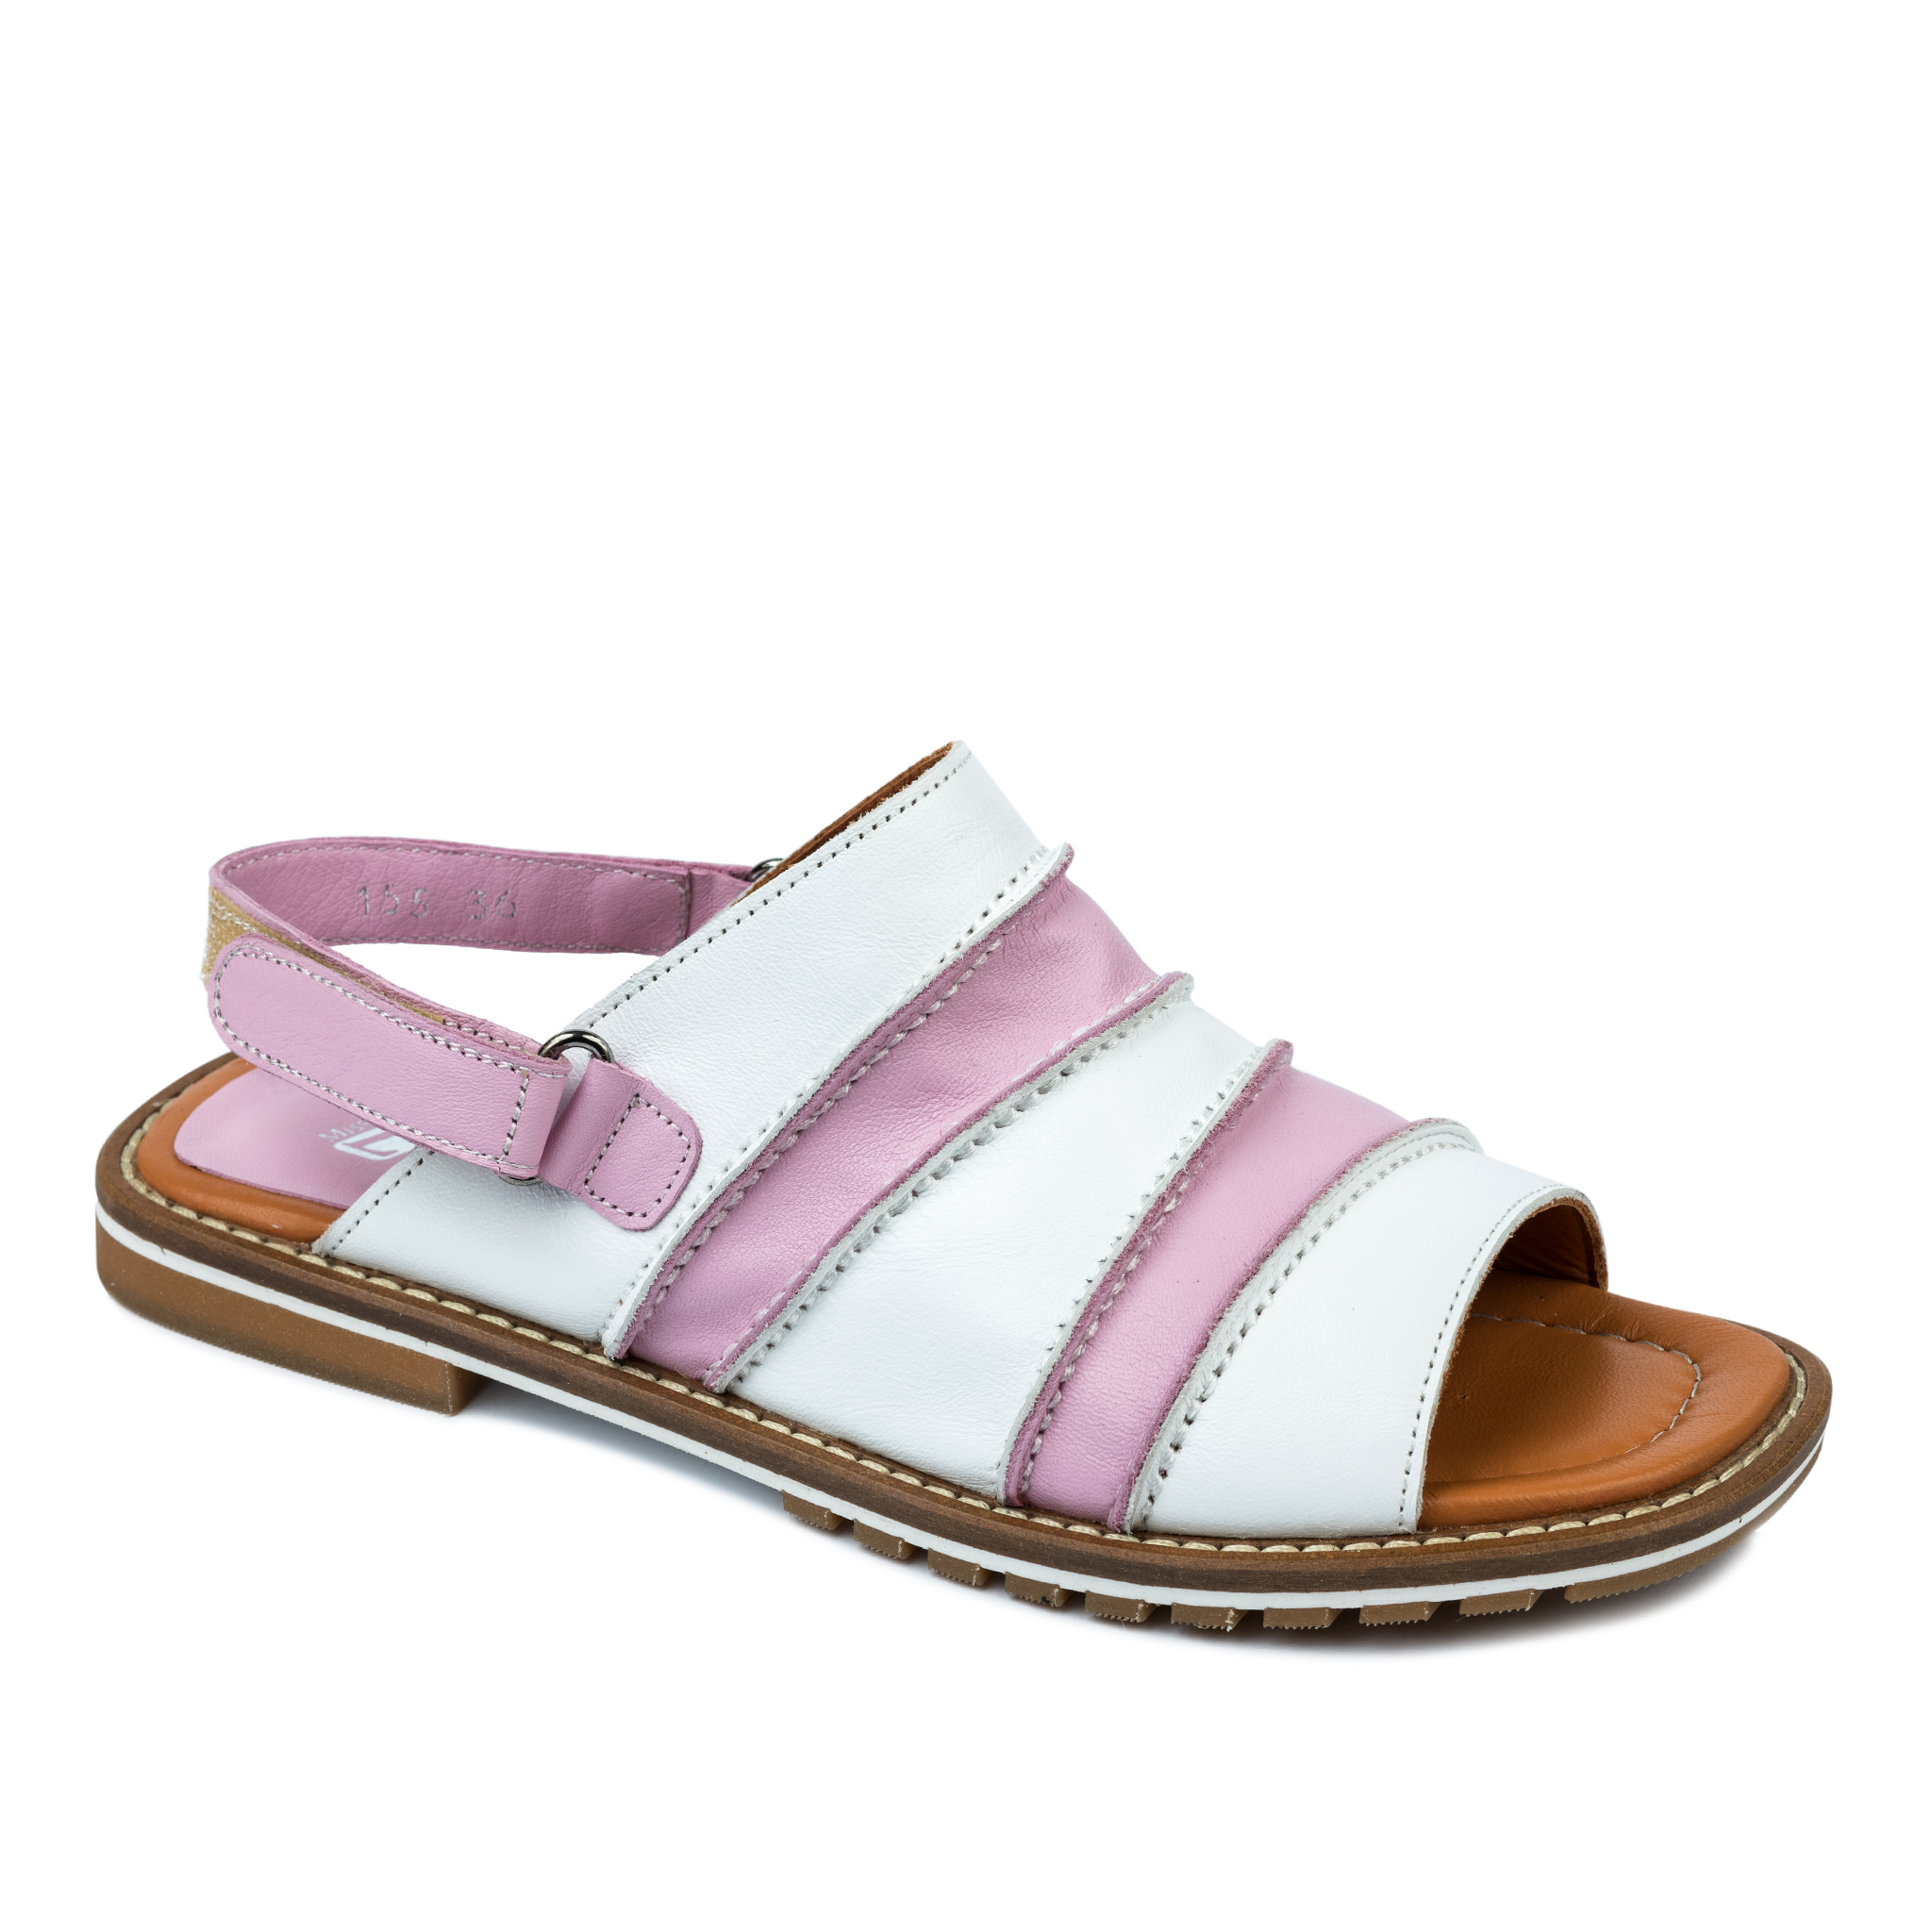 Leather sandals A645 - ROSE